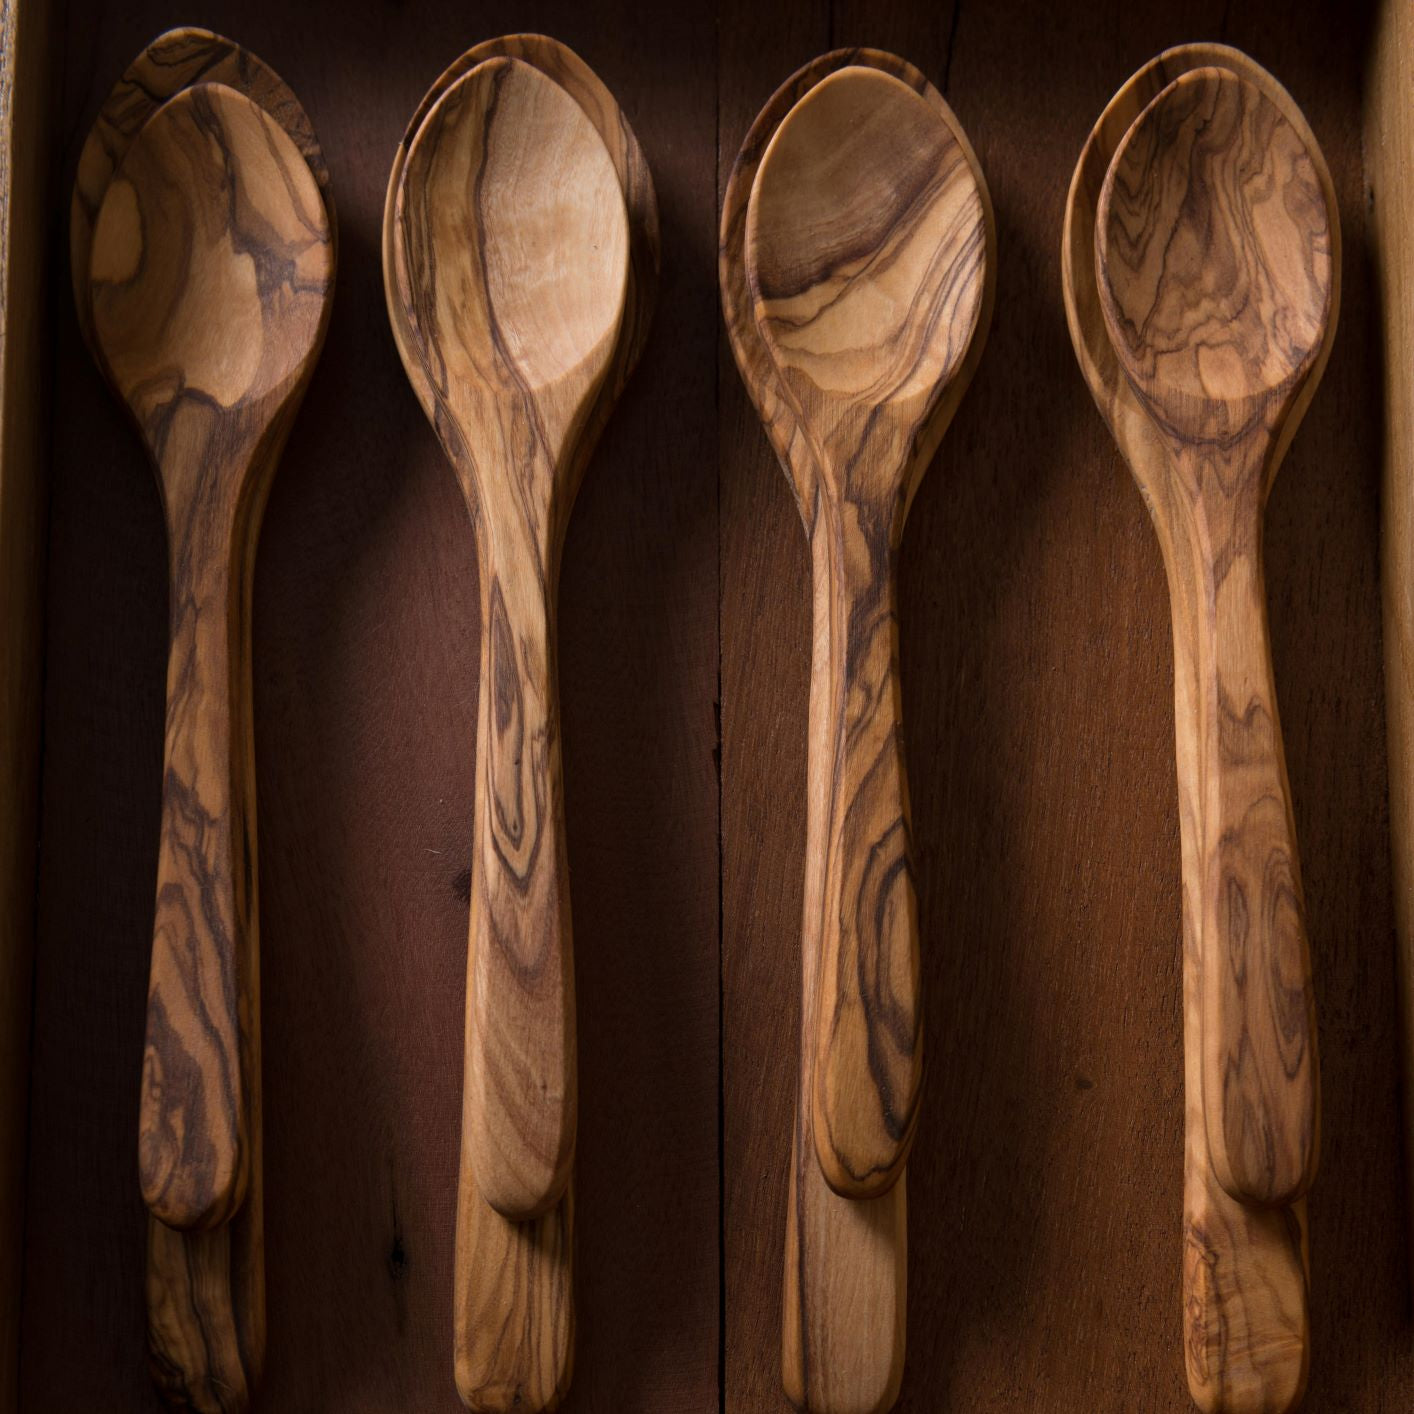 Olive Wood Spoons, Large Set of 4